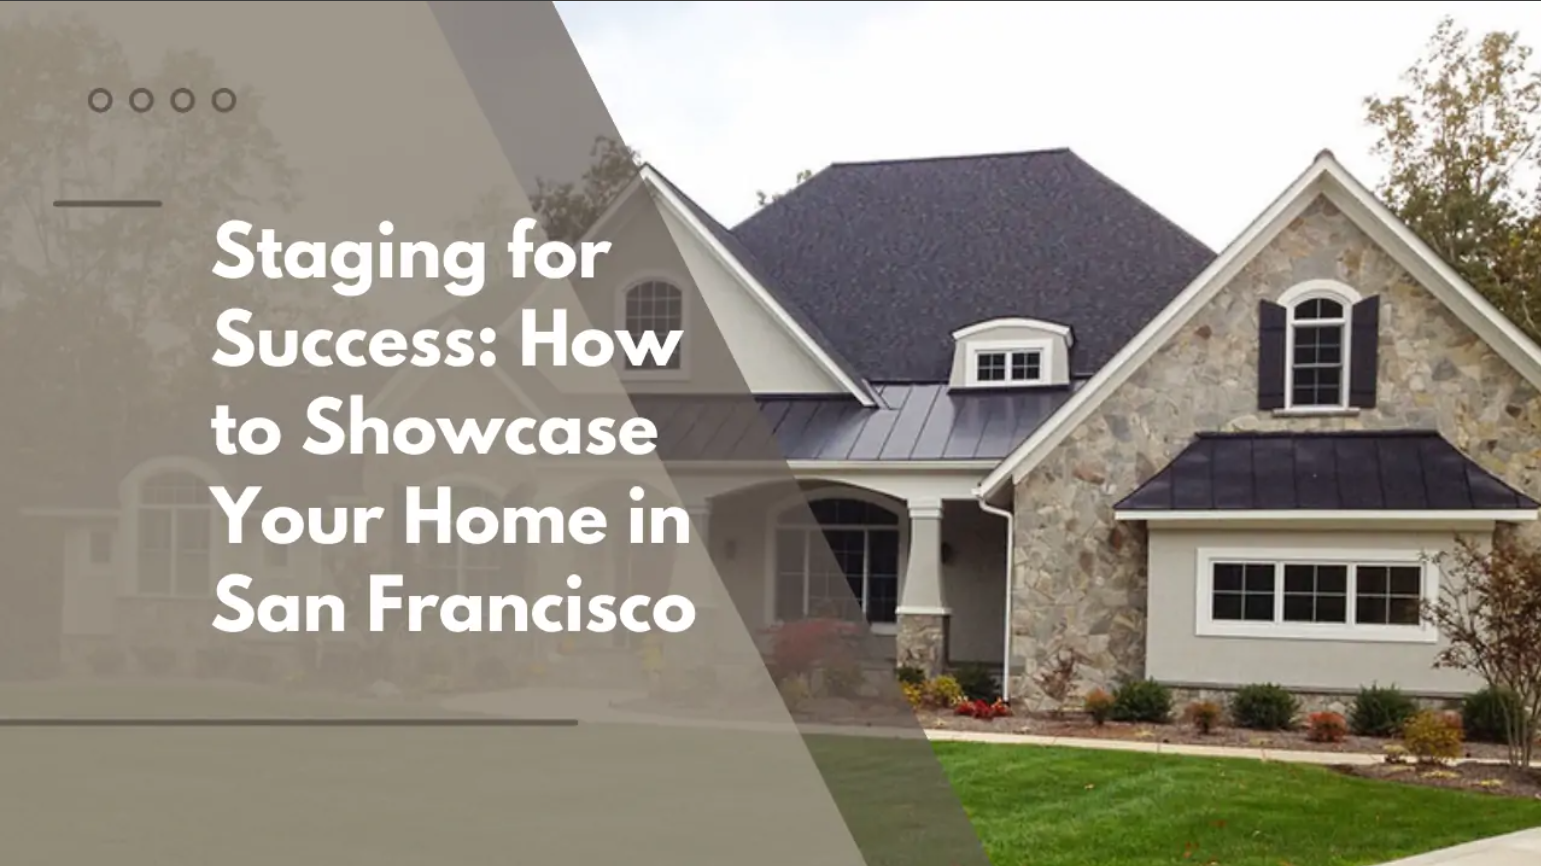 Staging for Success: How to Showcase Your Home in San Francisco